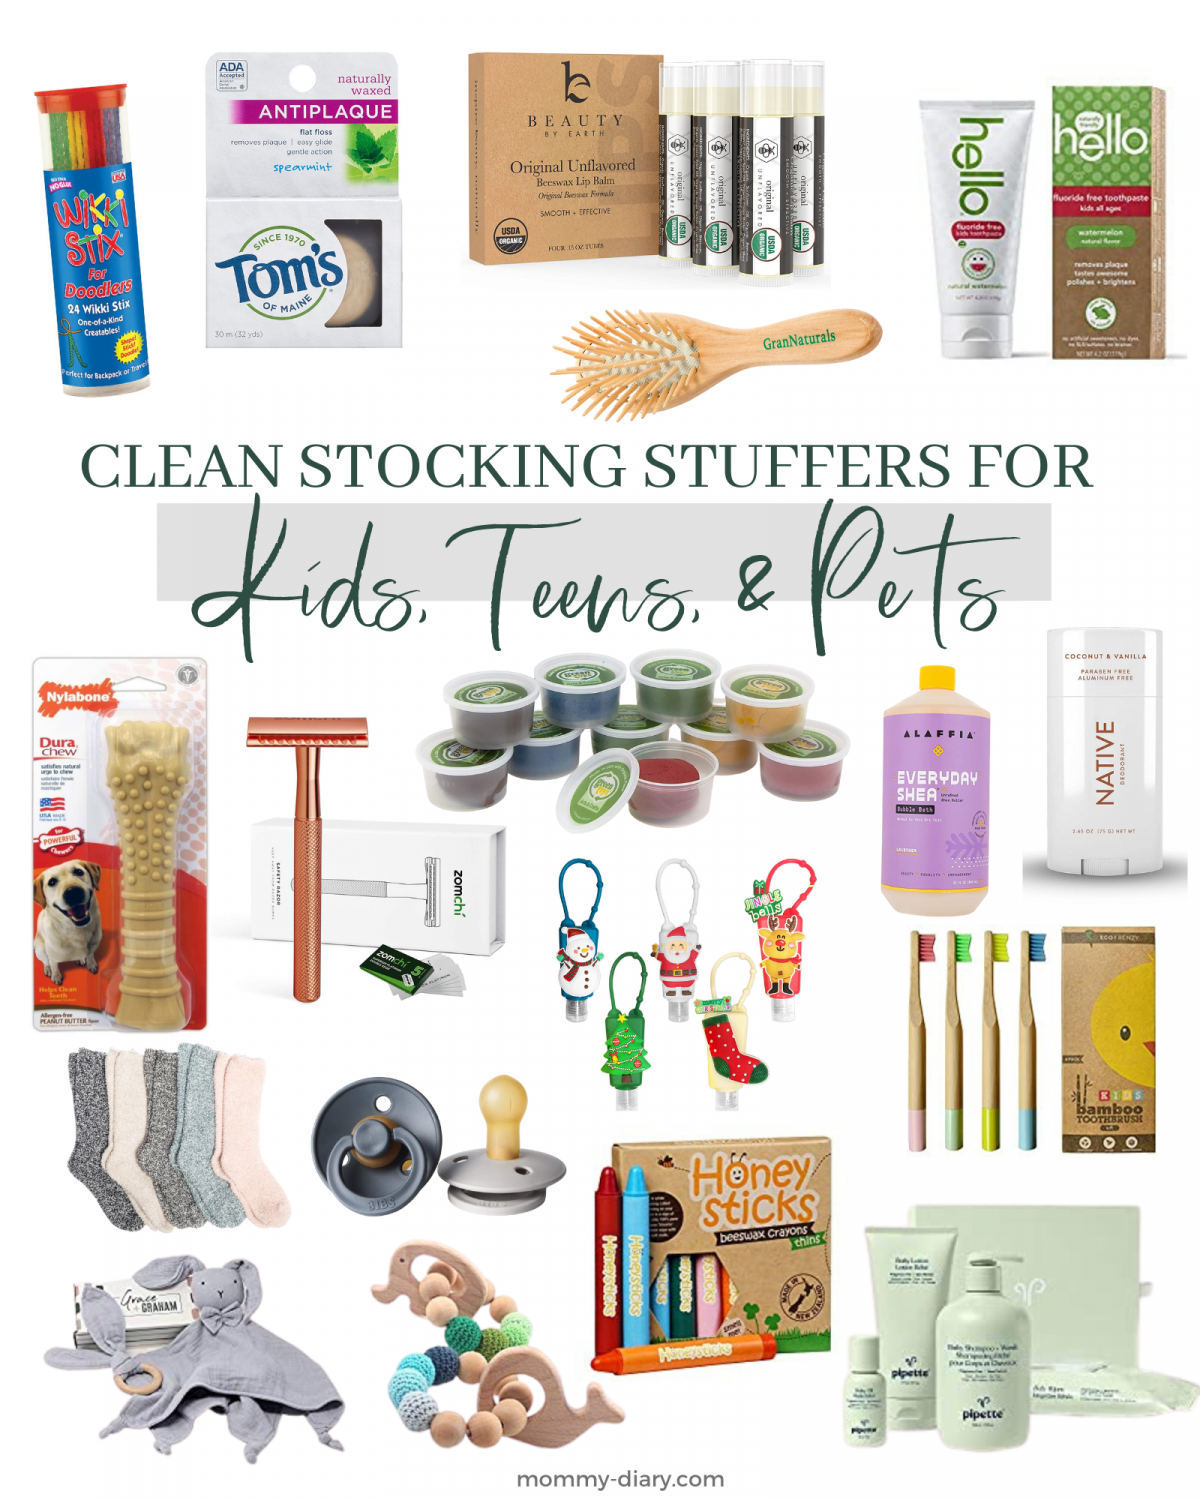 Stocking Stuffer Ideas for Toddlers - Intentional Living